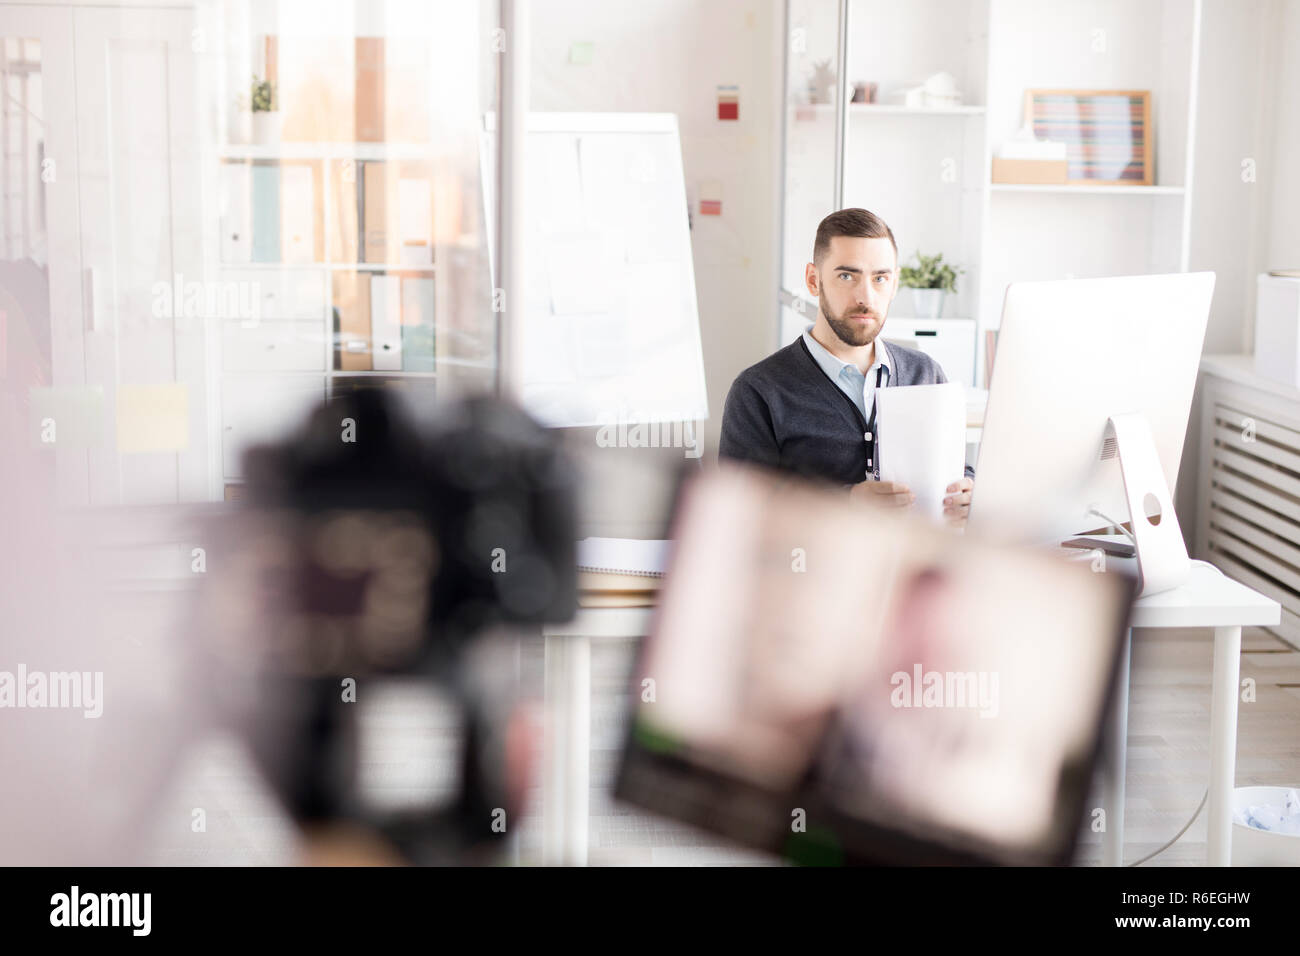 Office Worker Posing Stock Photo